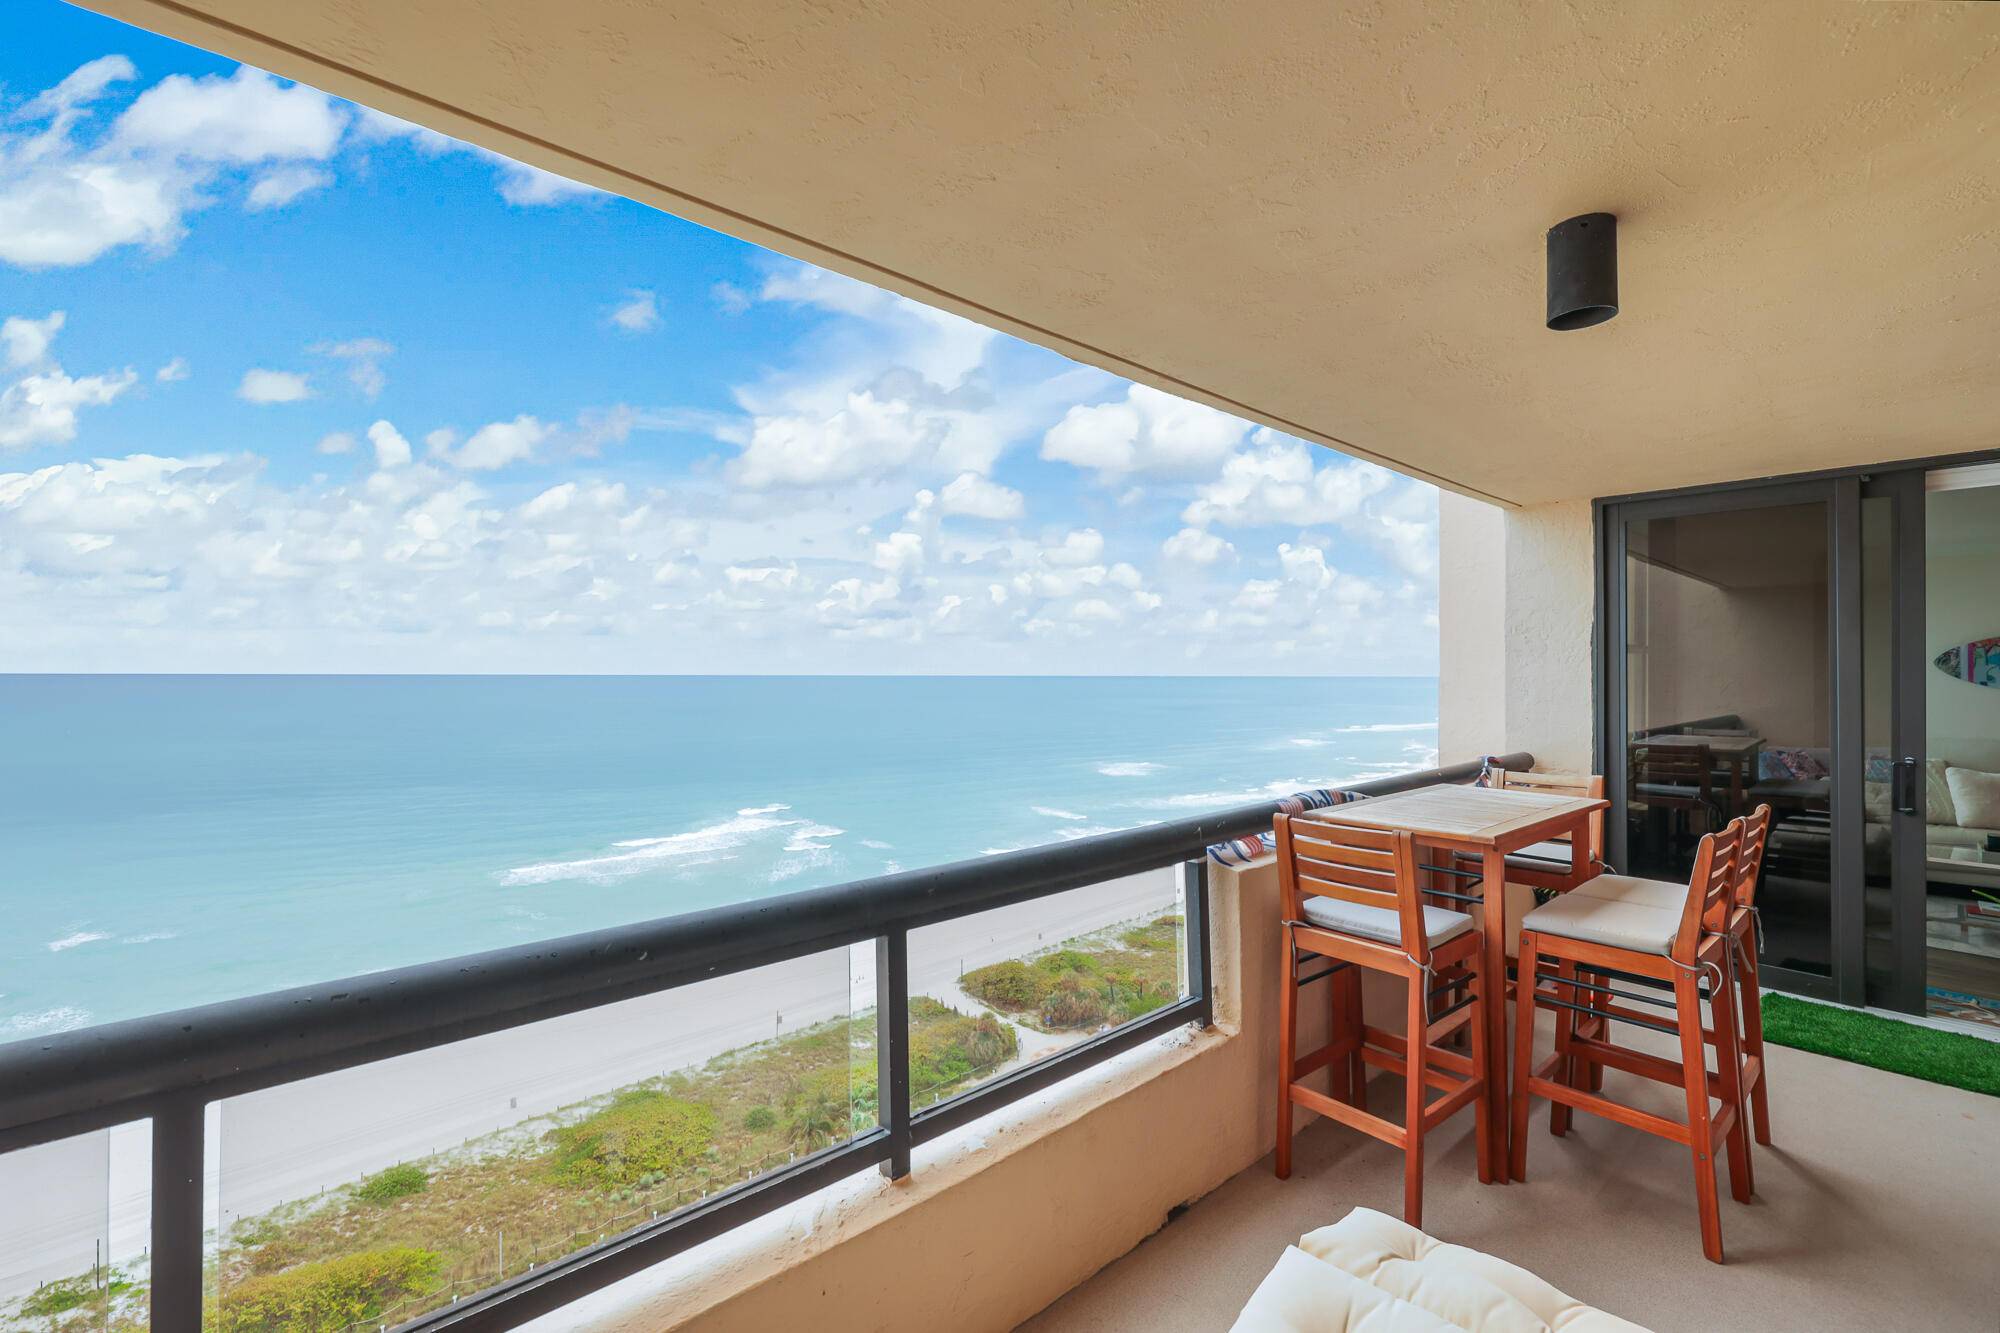 Stunning views from this direct Ocean front condominium.